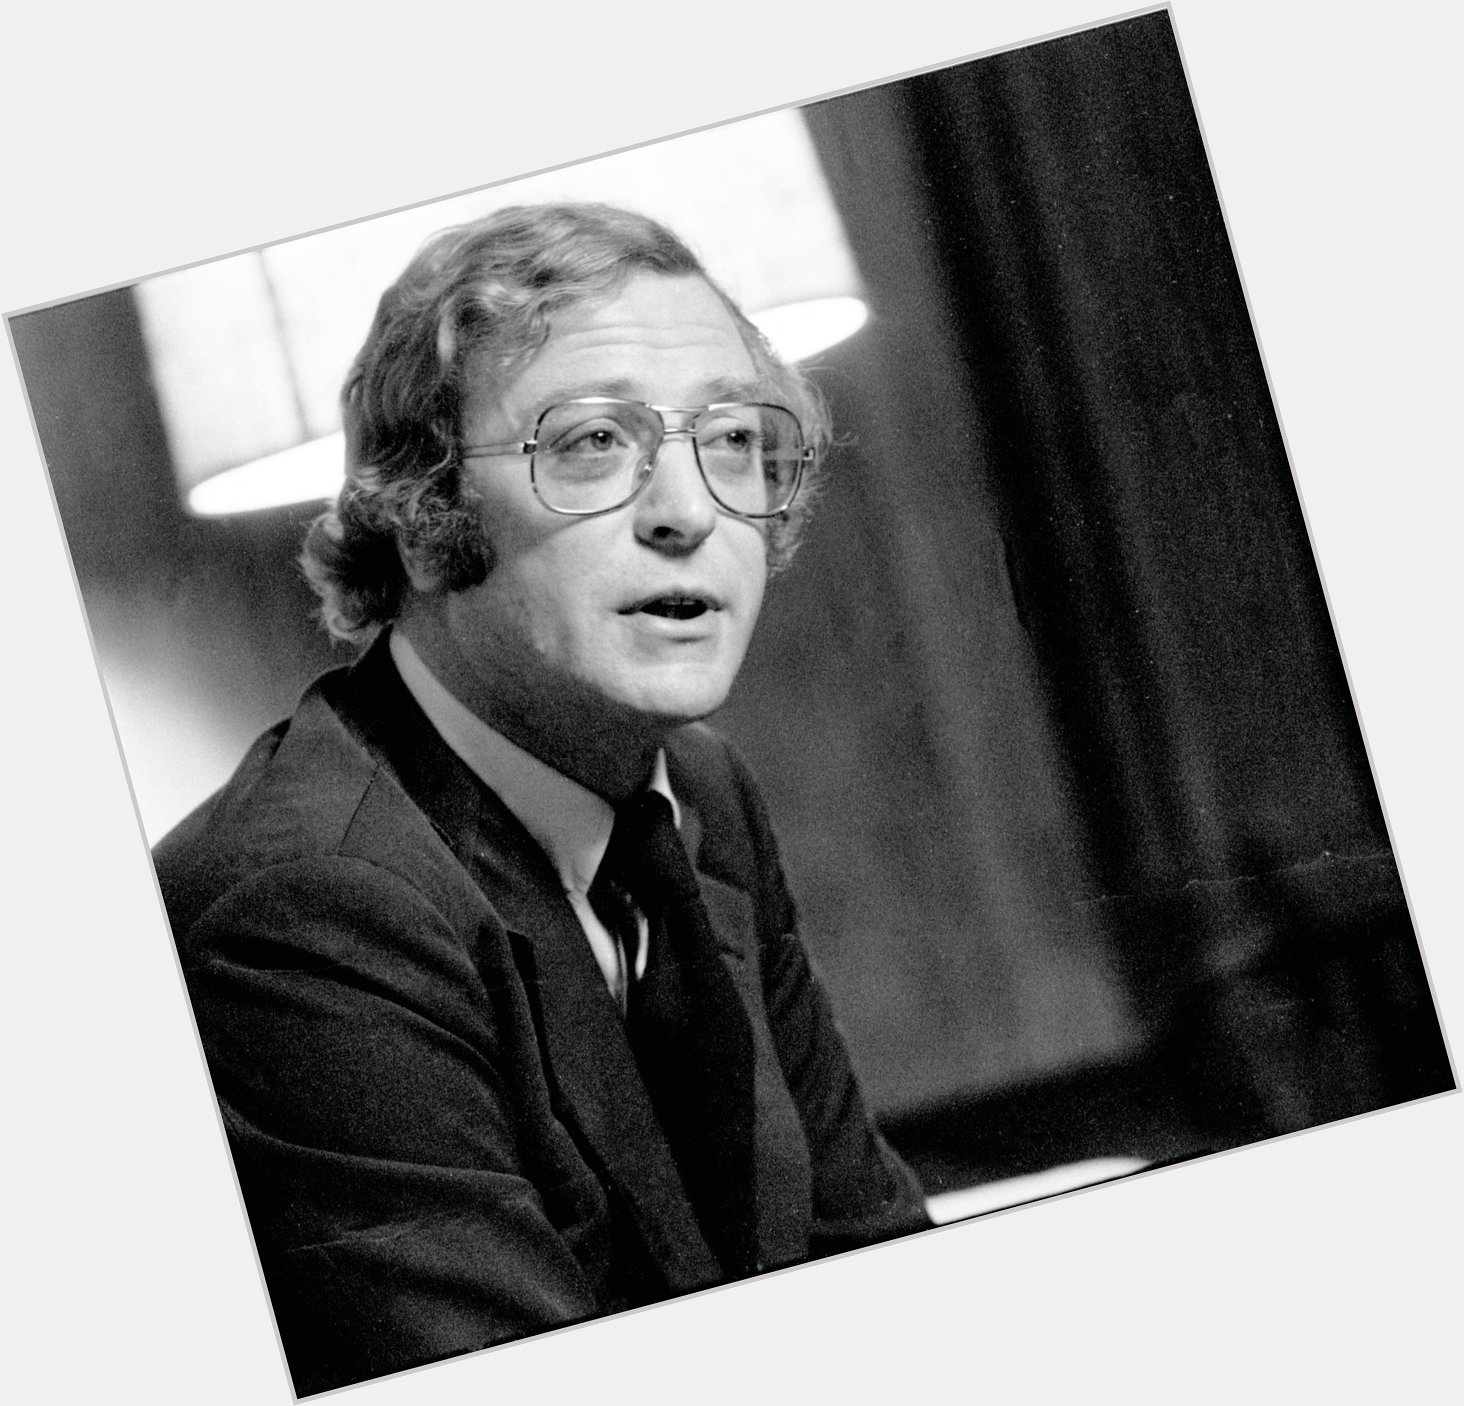 This living legend celebrates his 90th birthday today. Happy birthday, Sir Michael Caine. 